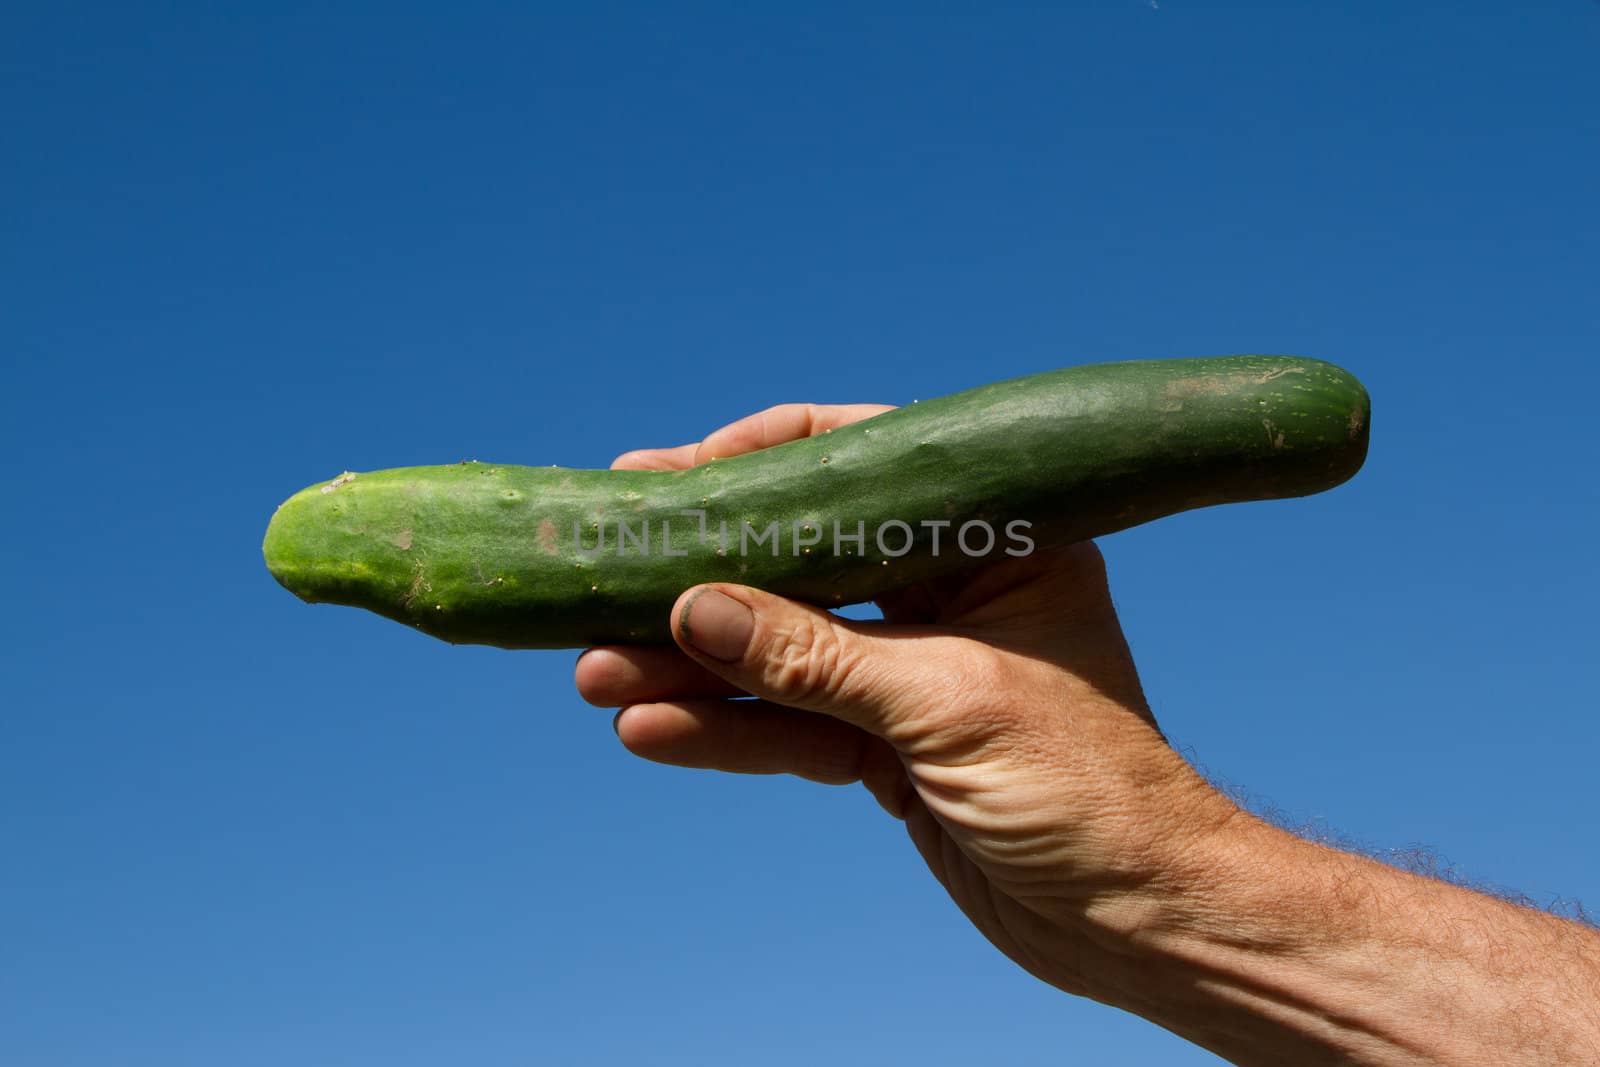 Cuccumber in hand. by richsouthwales